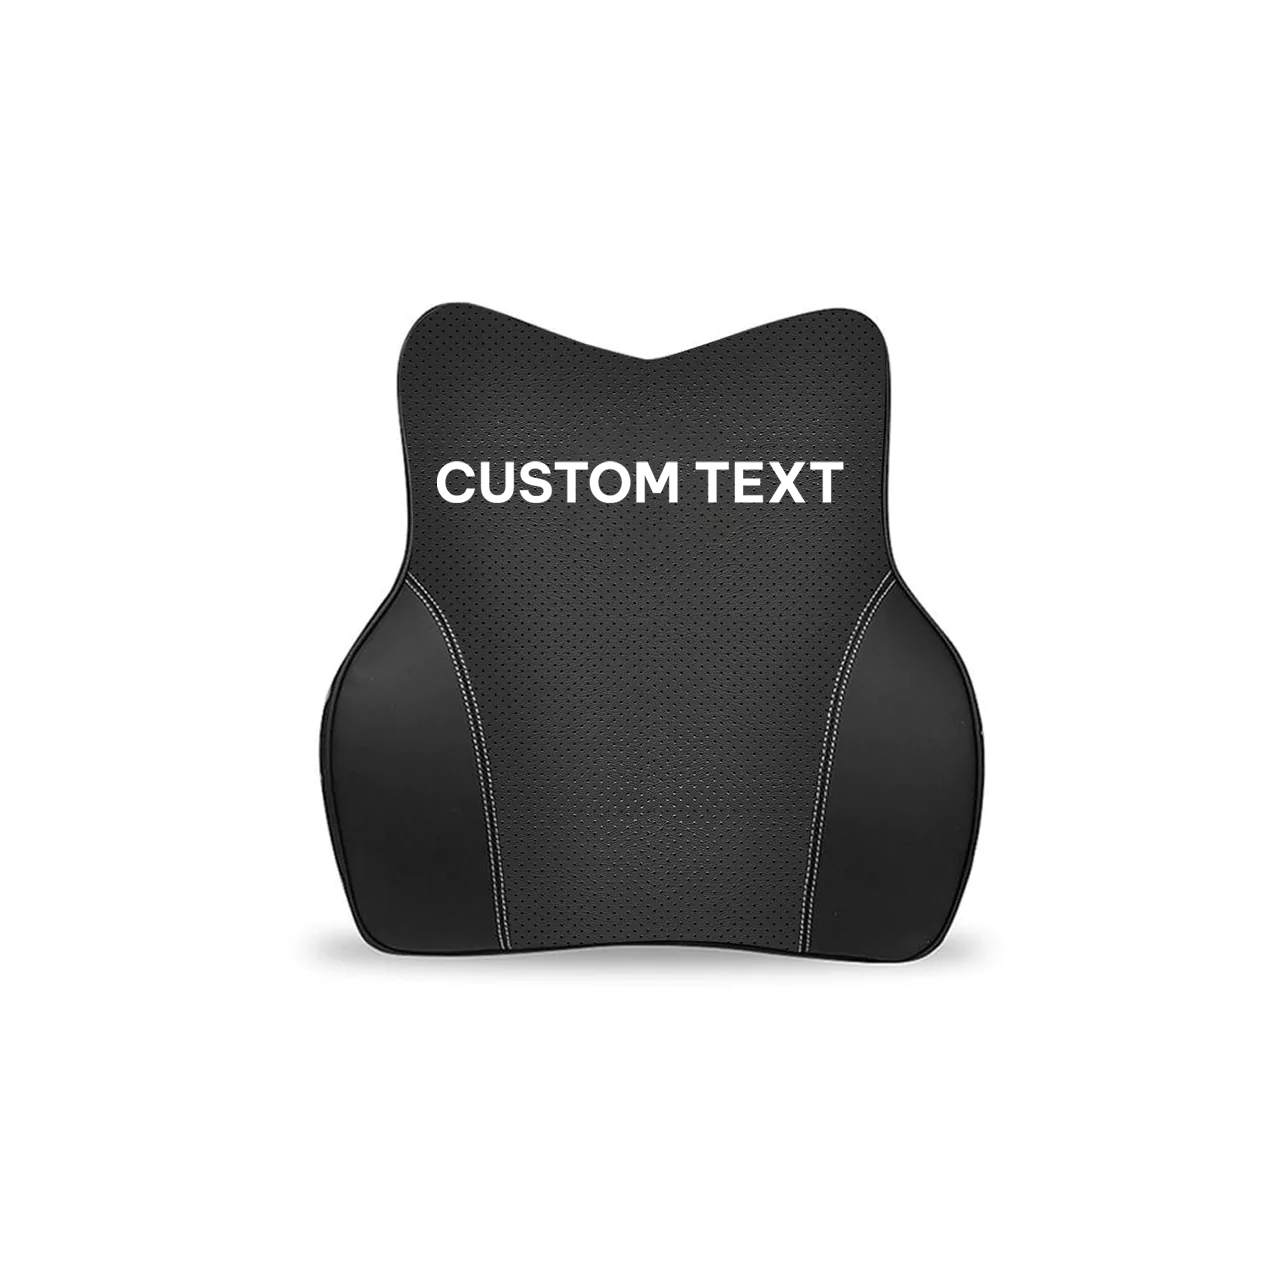 Custom Text For Car Headrest Neck Pillow and Lumbar Support Back Cushion Kit, Compatible with All Cars, Memory Foam Erognomic Design Universal Fit Muscle Pain and Tension Relief for Car Seat MG13992